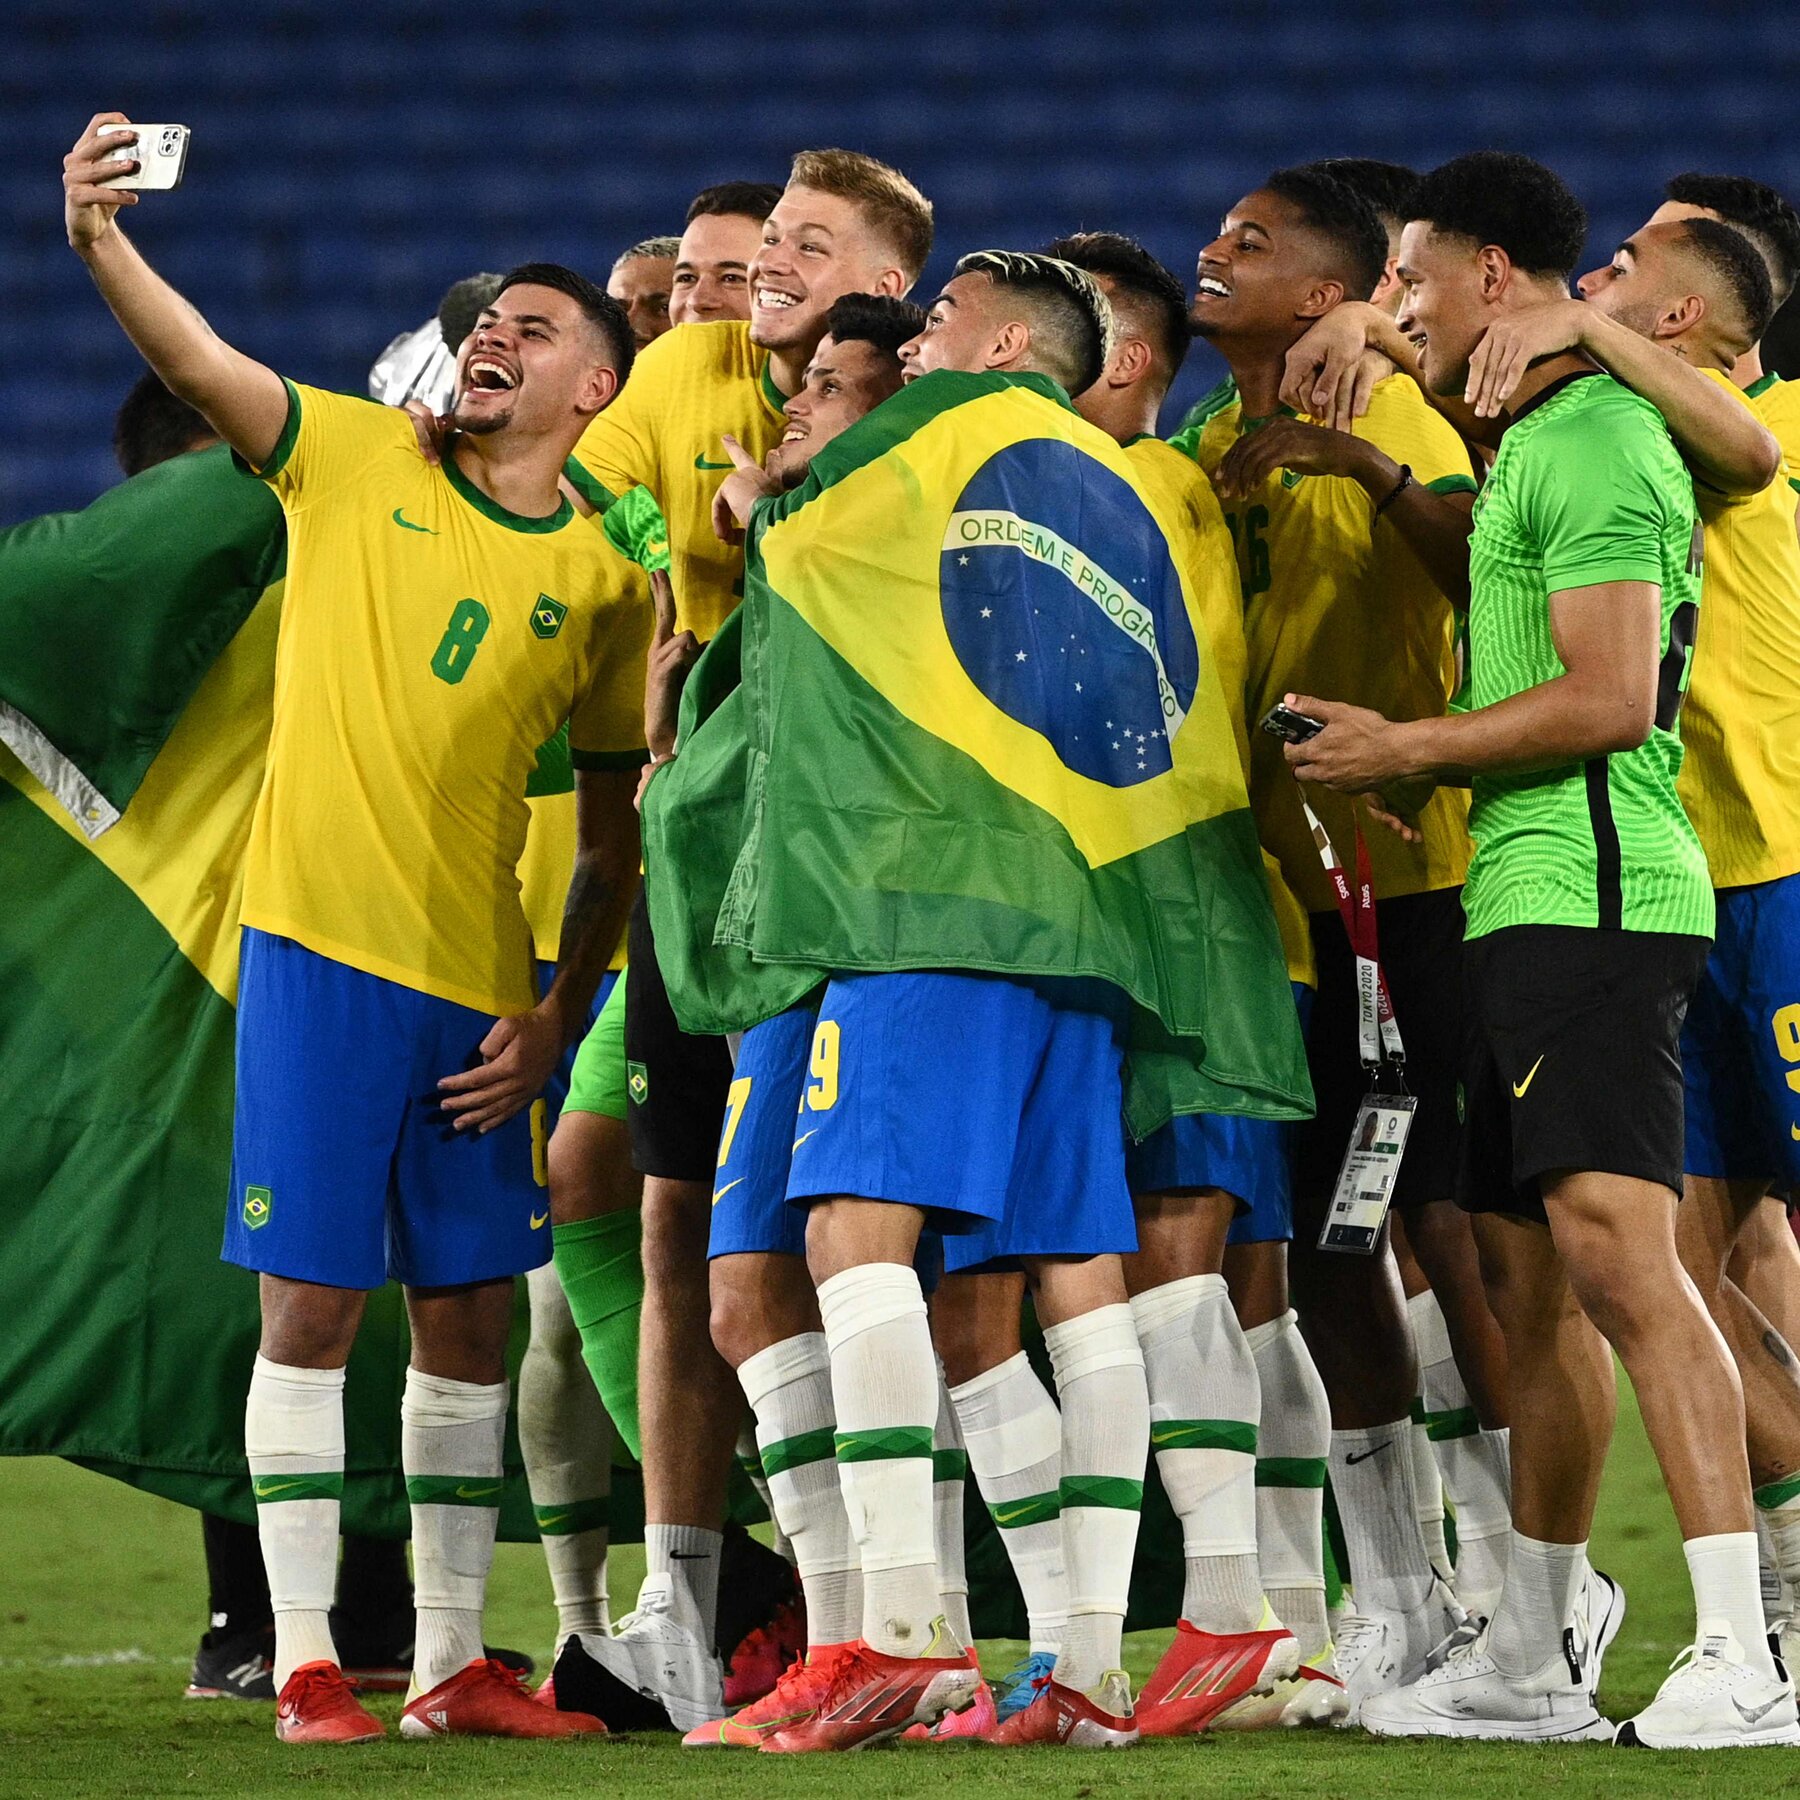 Brazil Defeats Spain to Win Soccer Gold